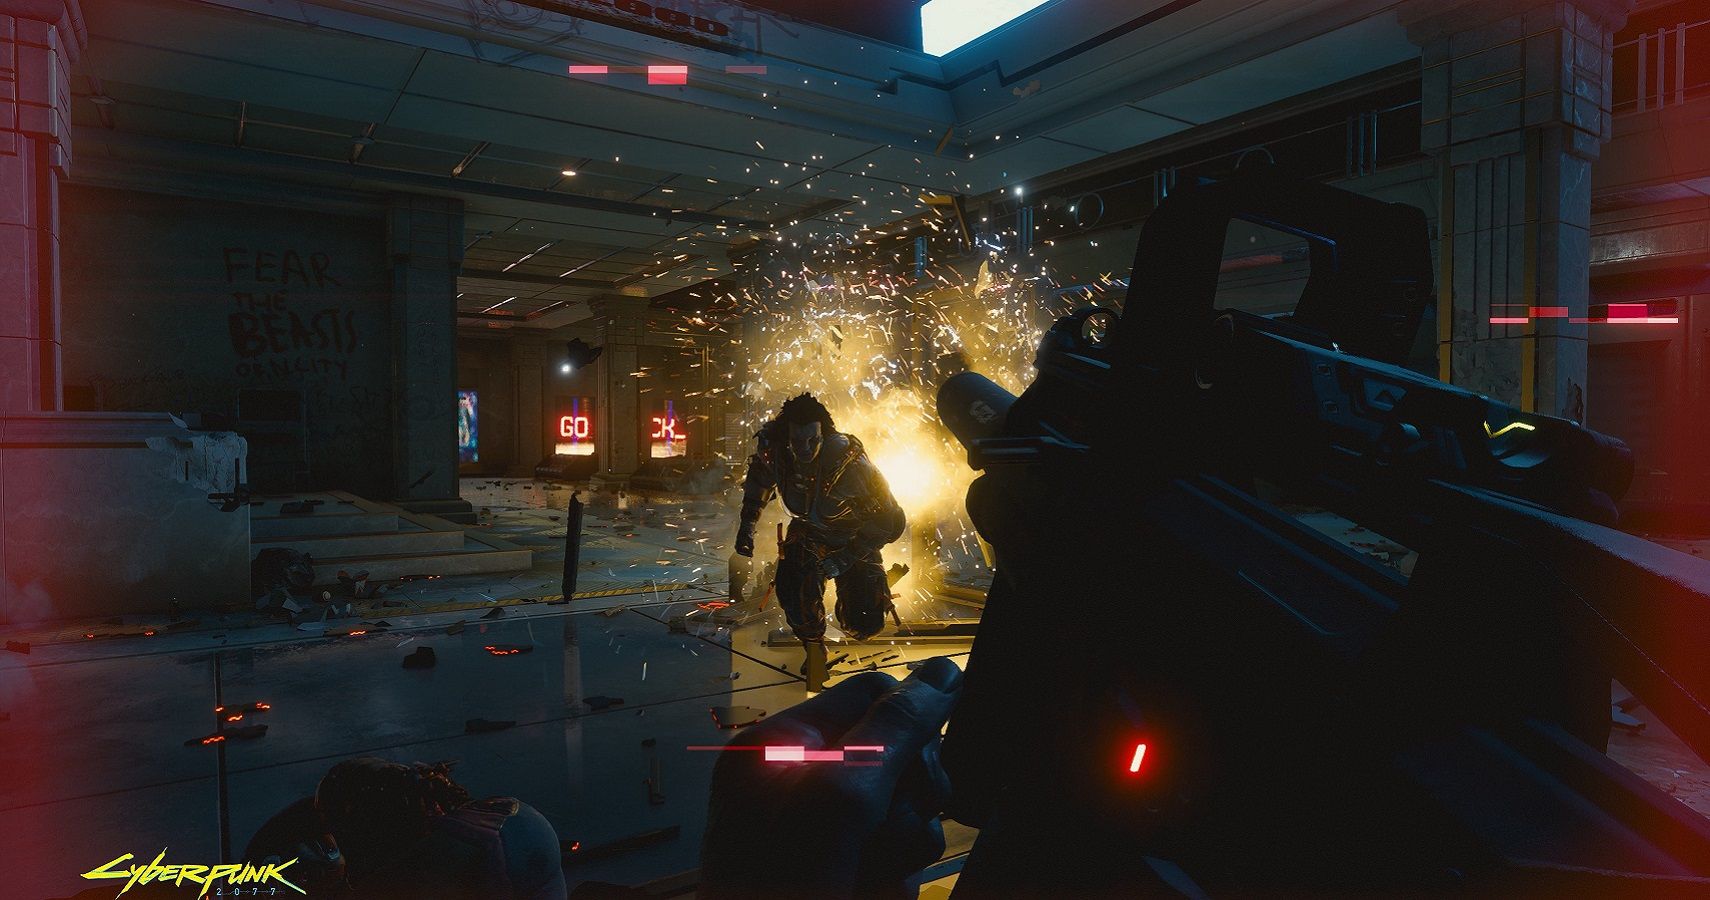 Cyberpunk 2077 Devs Say Keeping Cut Scenes In FirstPerson Is Good For Immersion